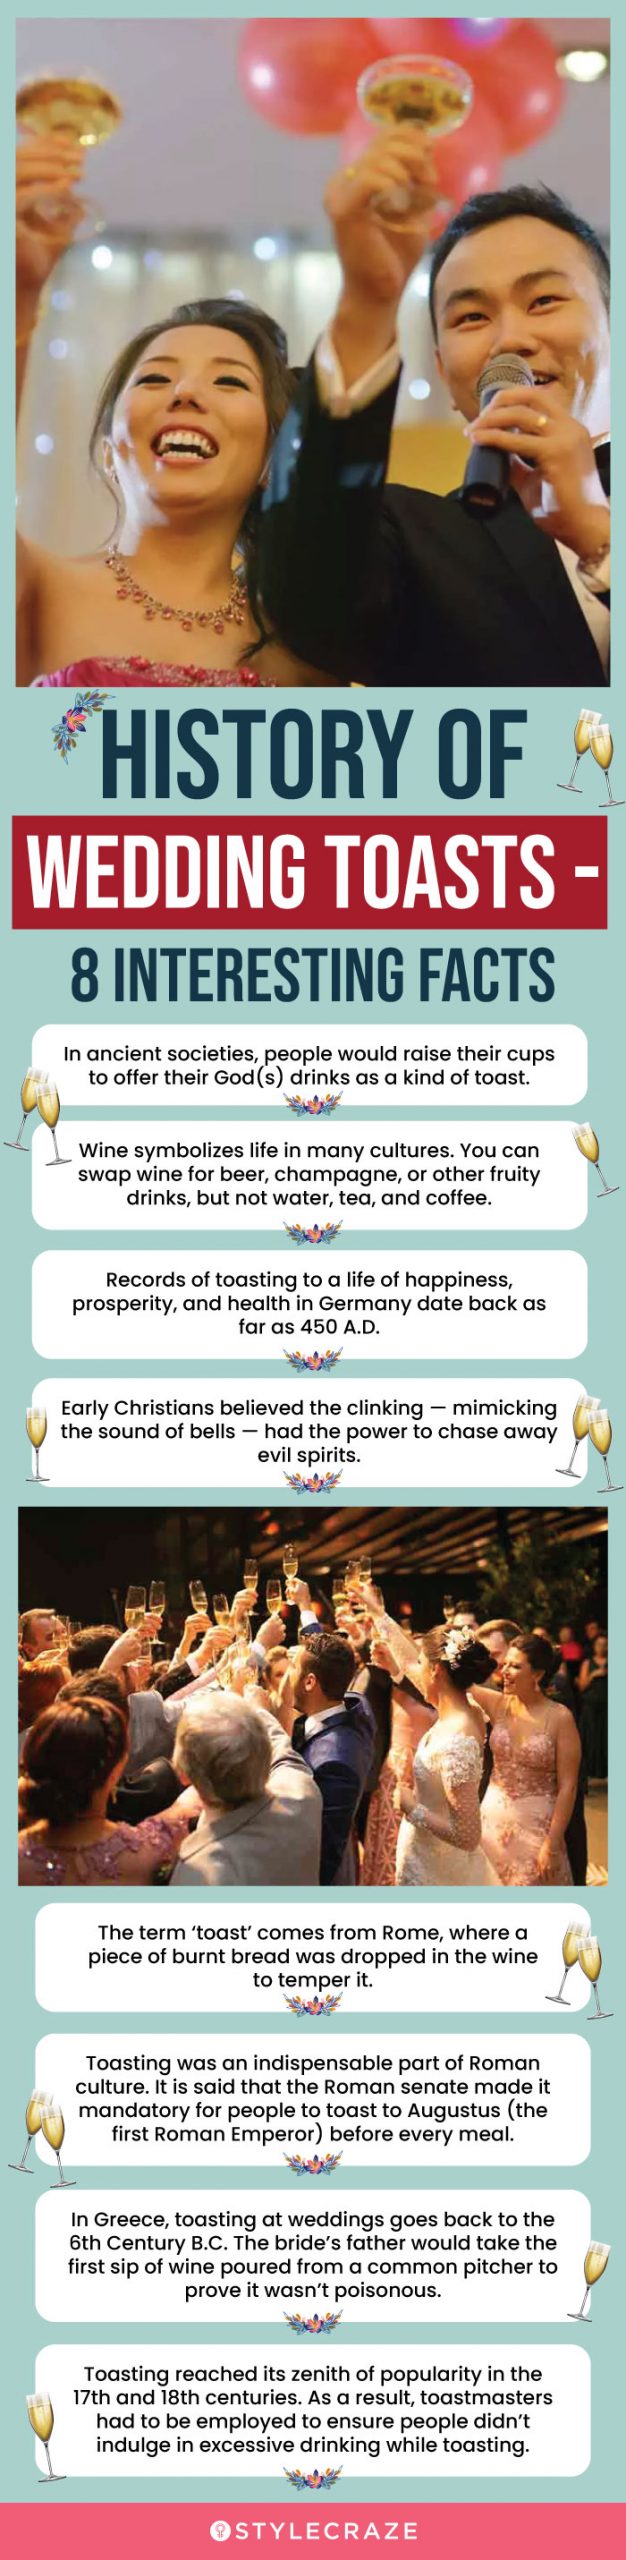 history of wedding toasts 8 interesting facts (infographic)